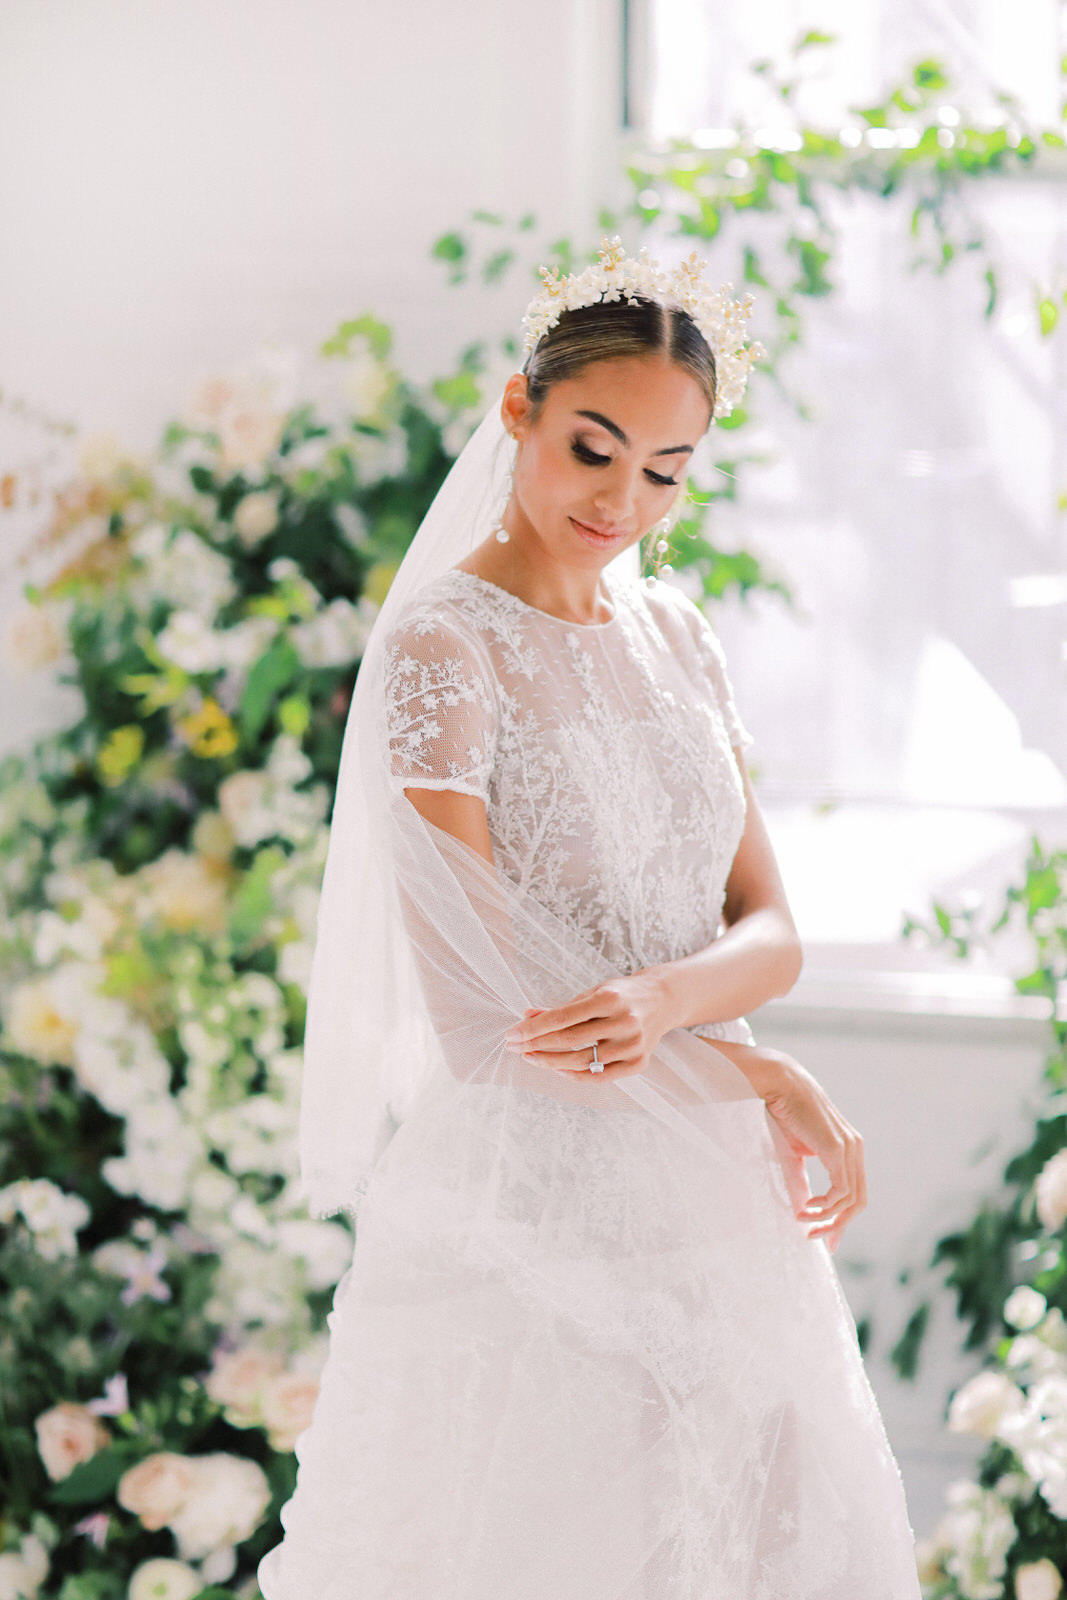 A bright floral bridal portrait session with a stylish Chana Marelus dress from Spina Bridal. Florals and styling by Kaleb Norman James, and photography by New York City film wedding photographer Lindley Battle.